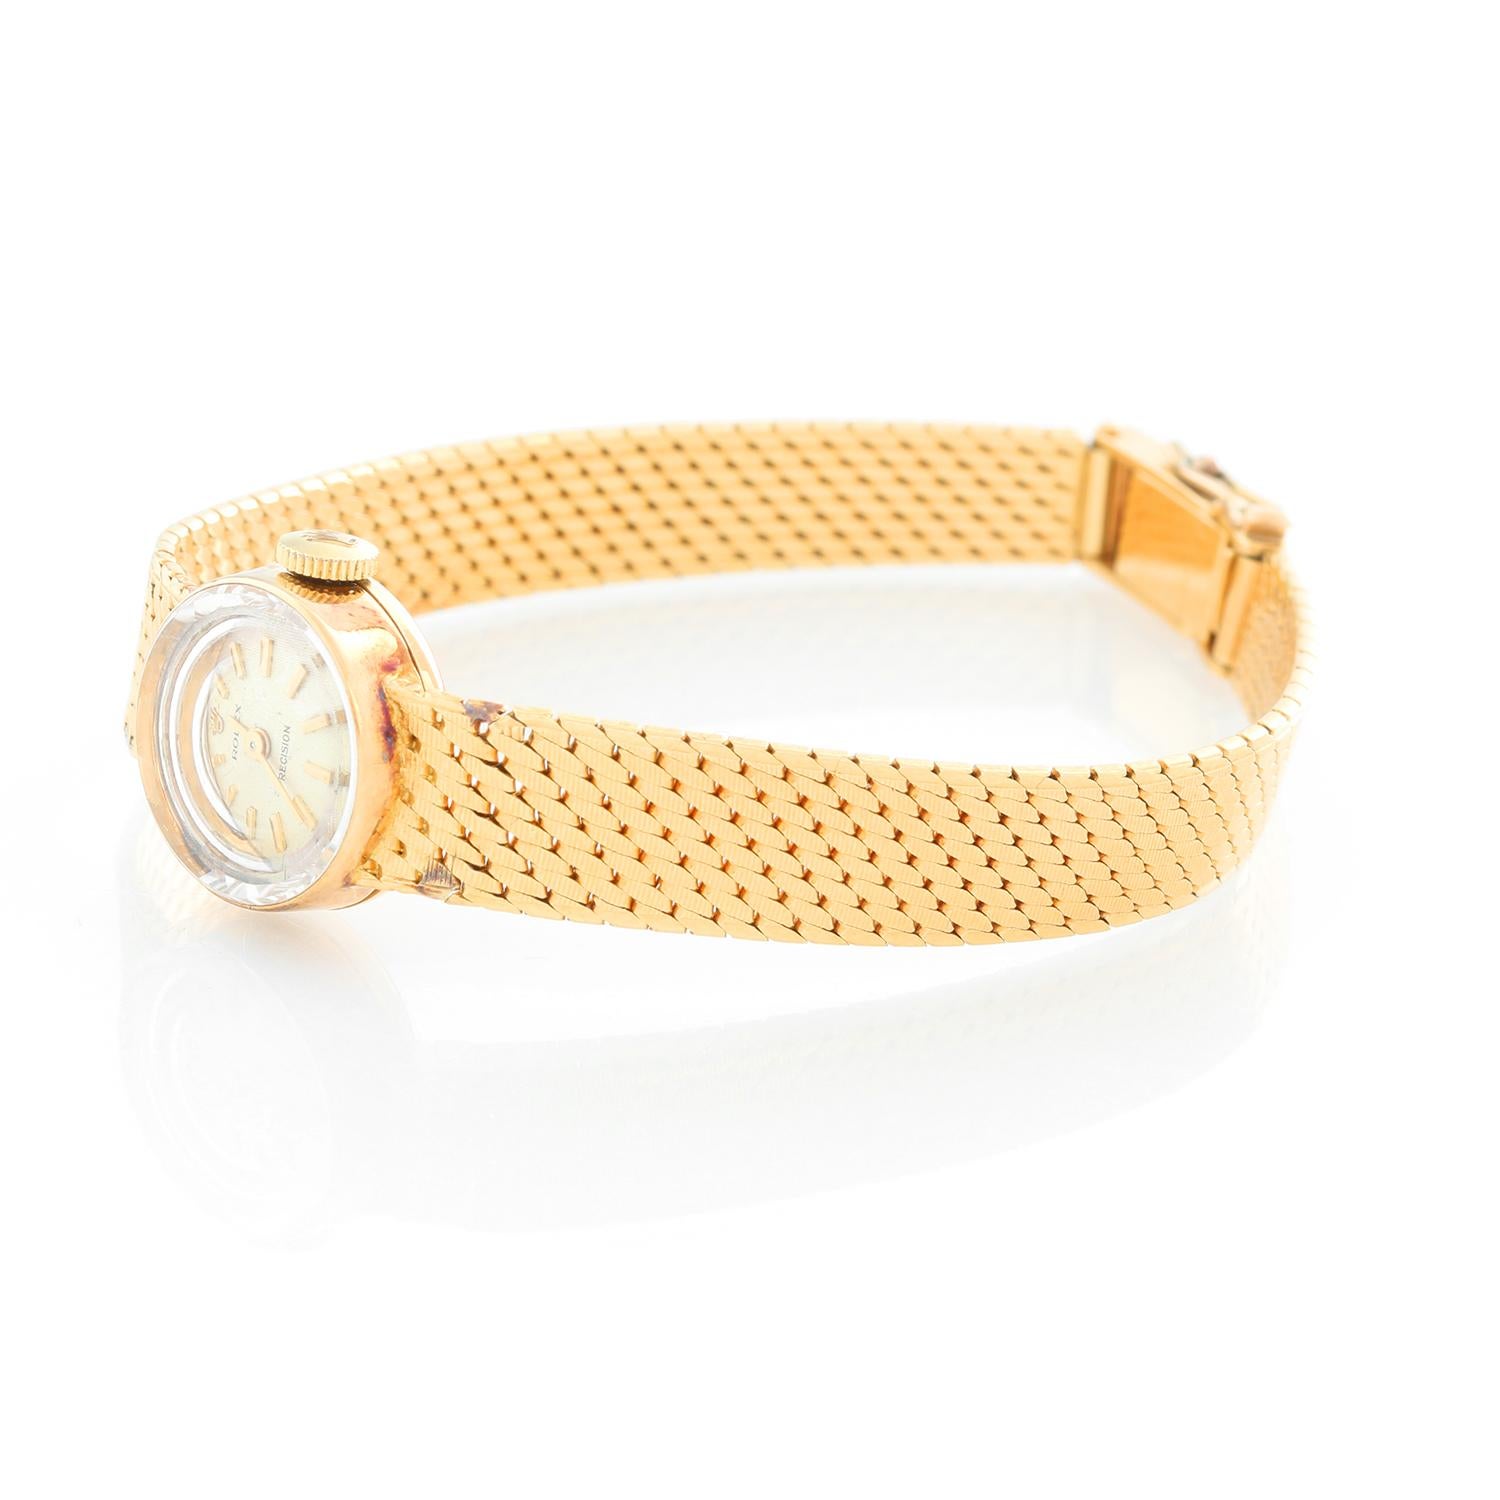 Rolex Ladies Classic 18K Yellow Gold Watch - Manual winding. 18K Yellow gold (15 mm). Silver textured stick dial. 18K Yellow gold bracelet with hinged clasp; will fit up to a 6 inch wrist. Pre-owned with custom box .